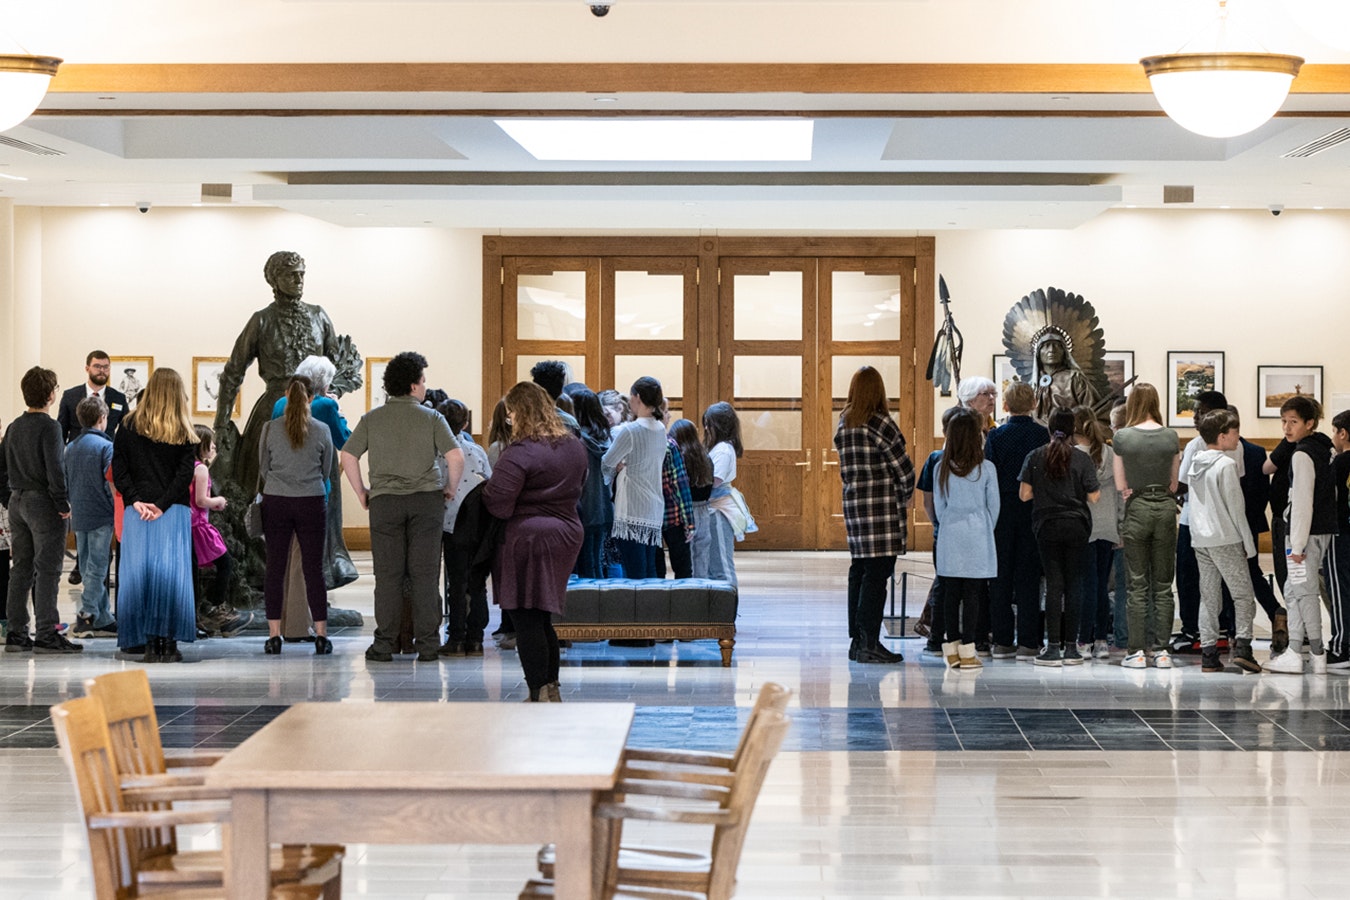 Visitors view the large bronze sculptures of Esther Howard Morris, left, and Chief Washakie in the Capitol Extension hallway in the basement of the state Capitol building in Cheyenne during the 2023 legislative session.